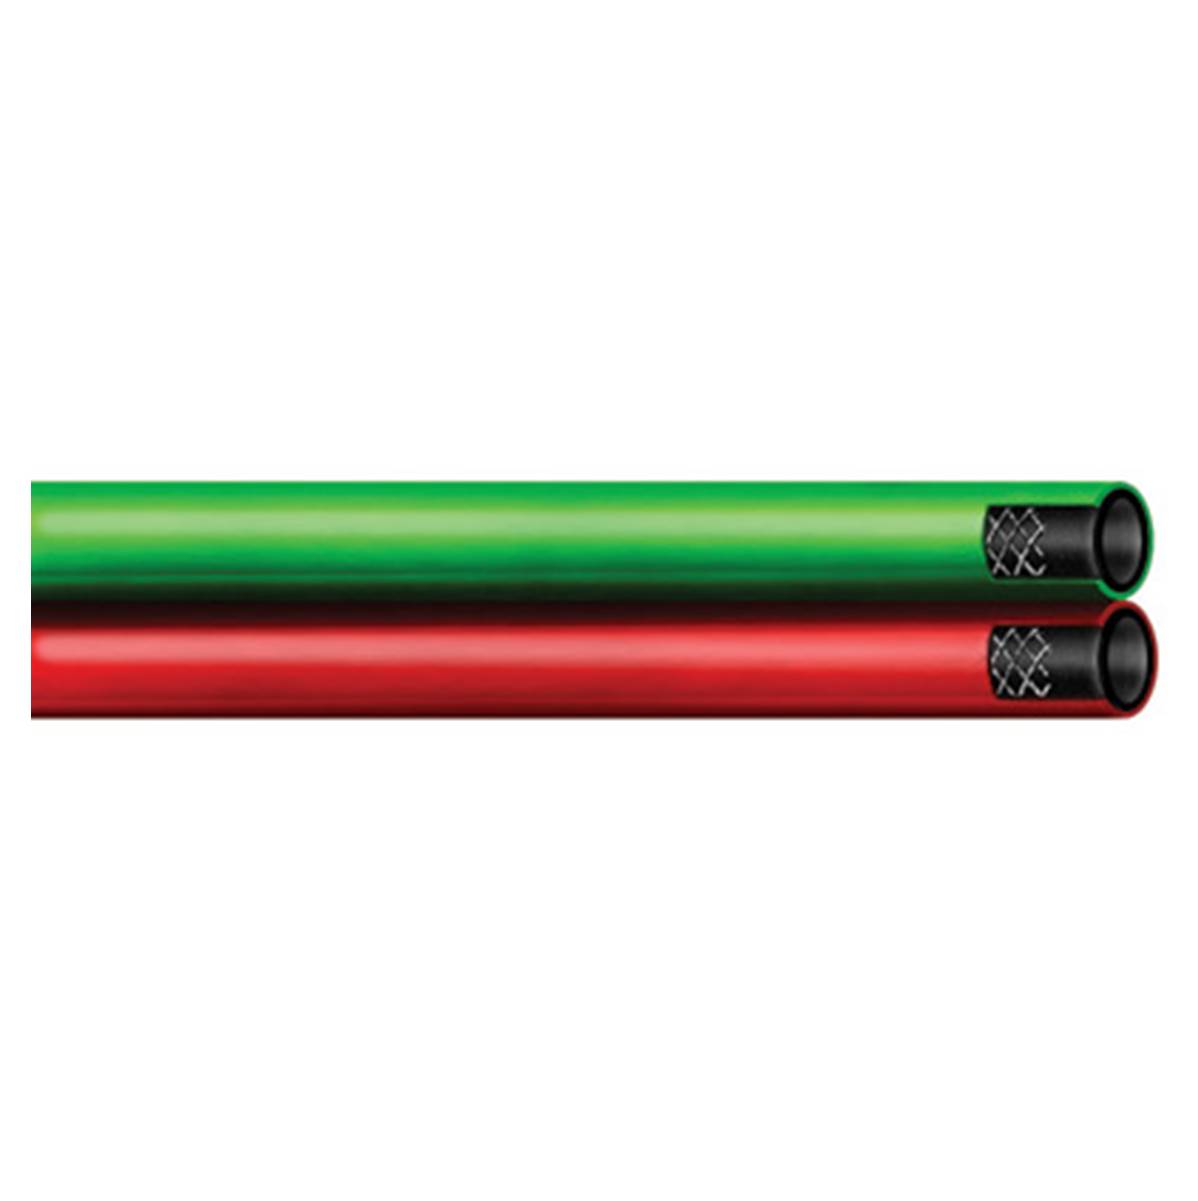 1 Unit RADNOR 1/4X 50 Red and Green SBR Synthetic Rubber Twin Hose with BB Hose Fittings 